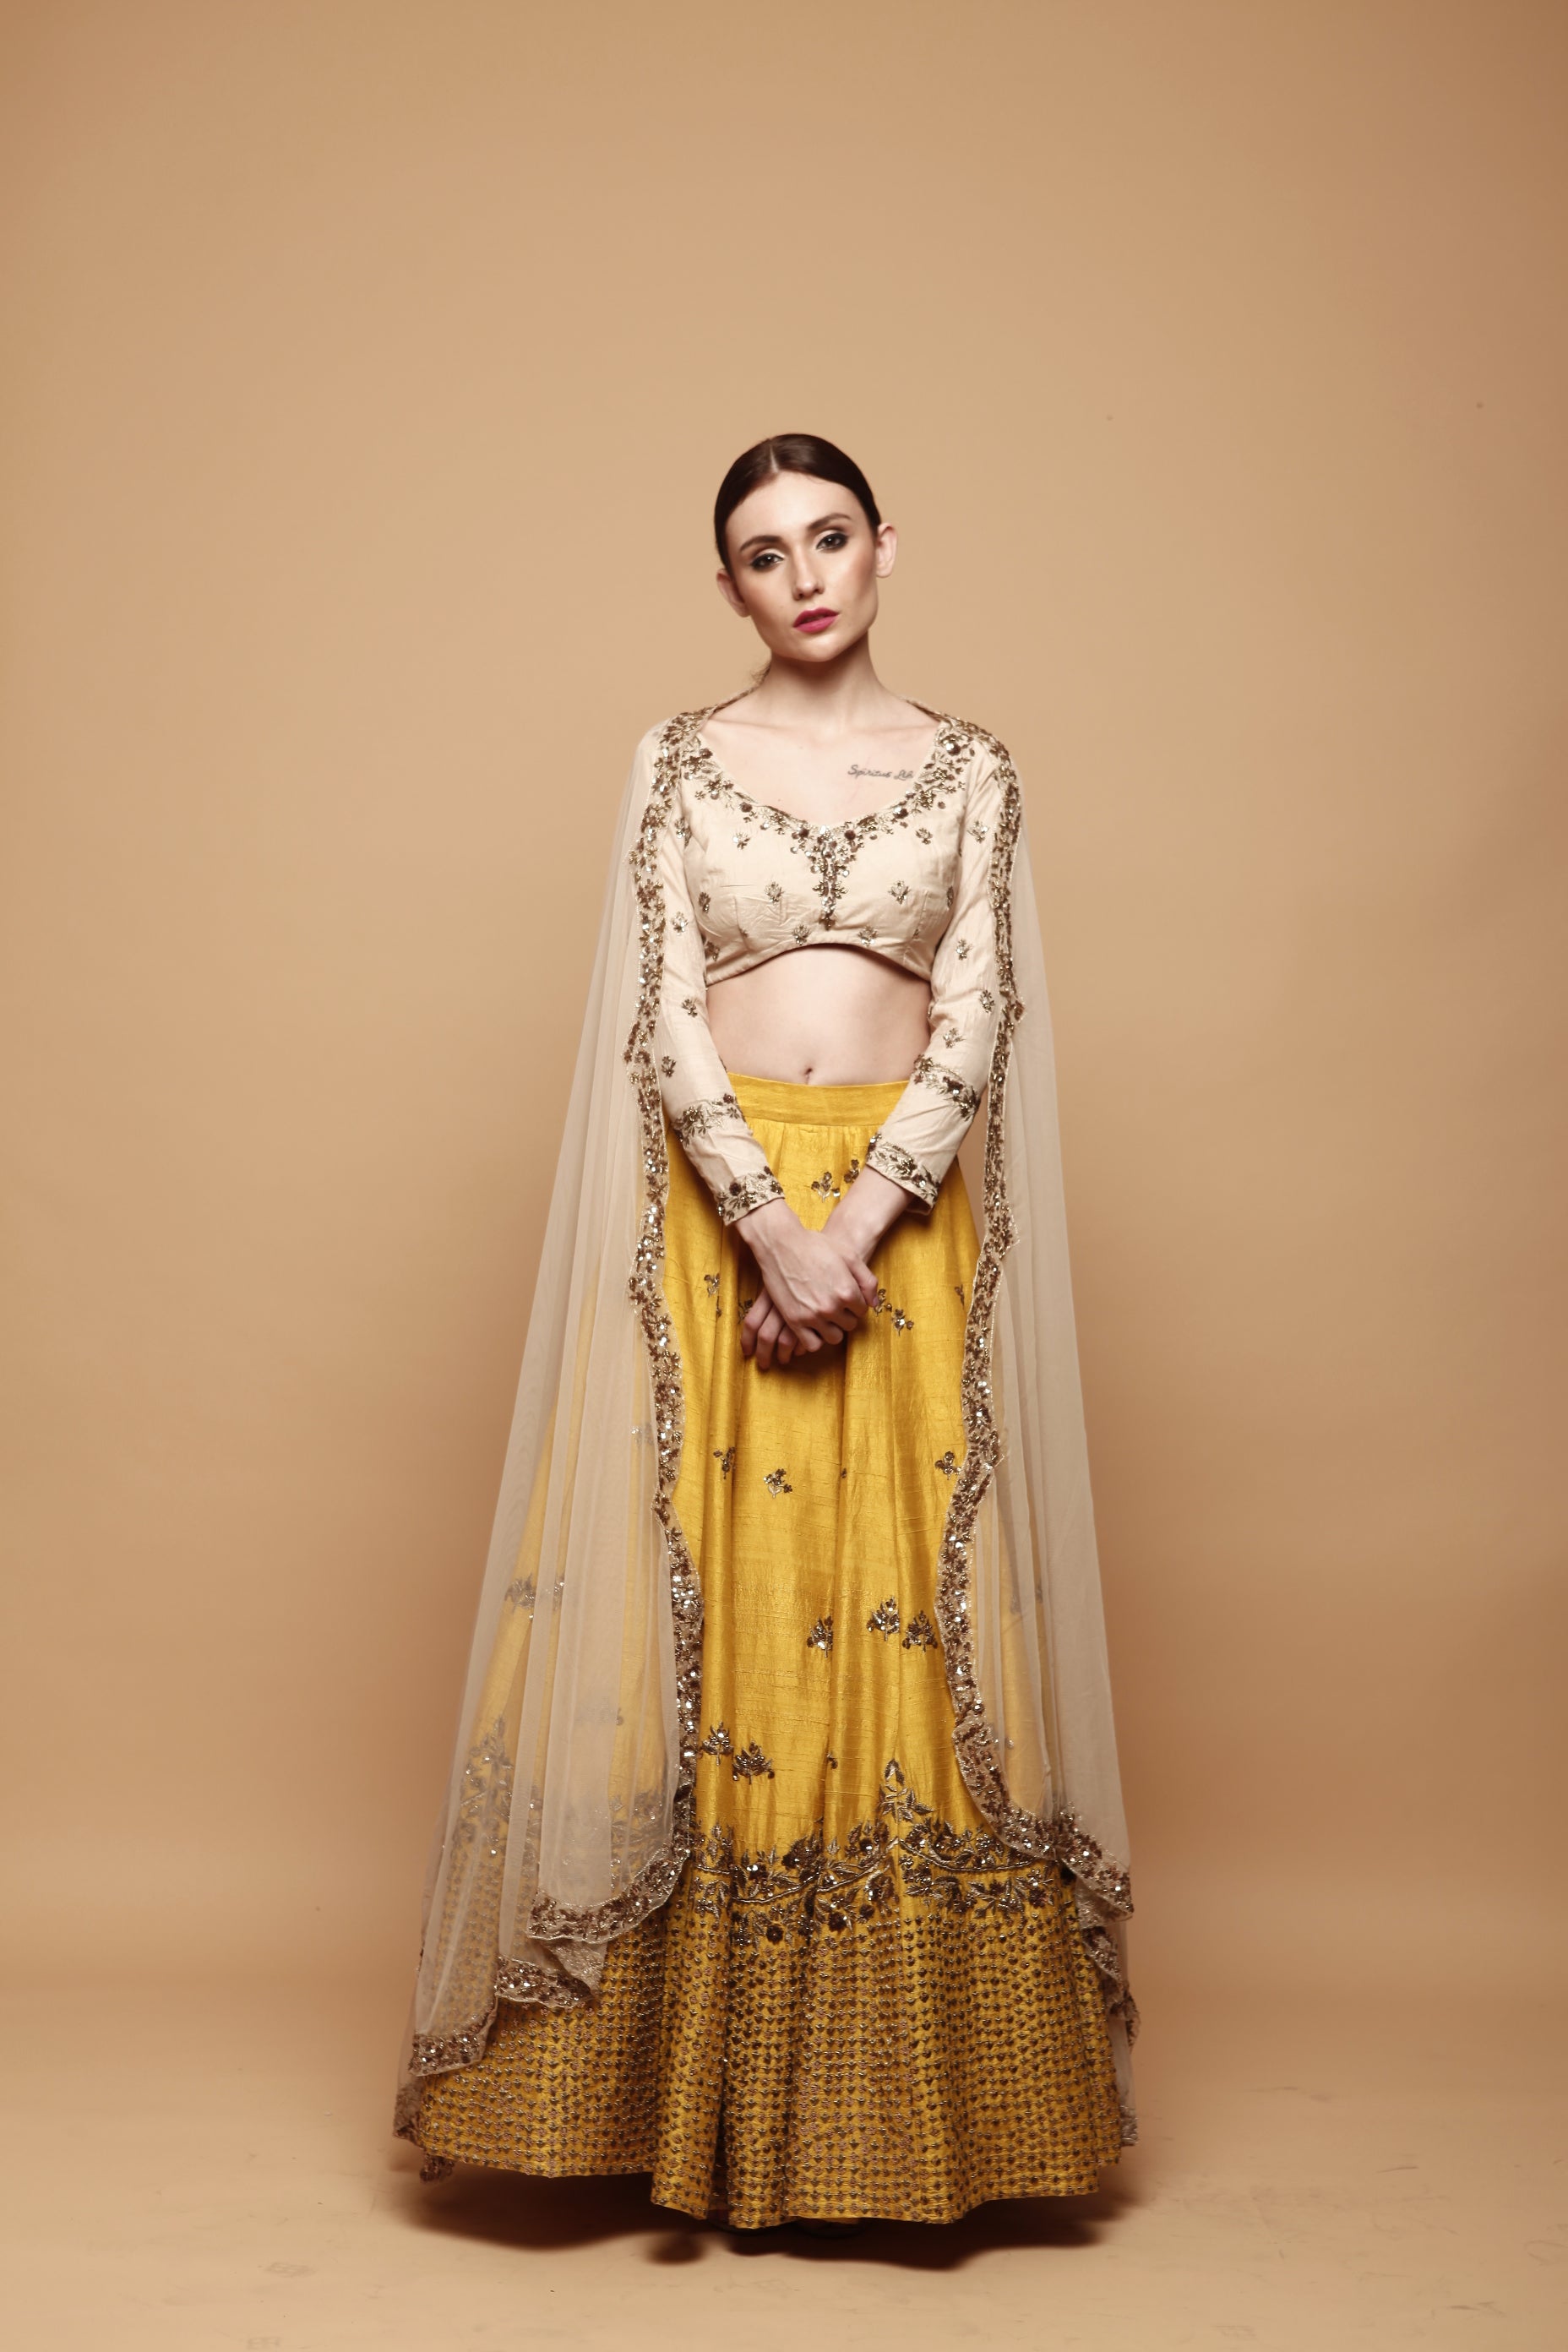 Premium Photo | Elegant Indian teenager in yellow and cream lehenga lace  and florals her vivacity enchanting all